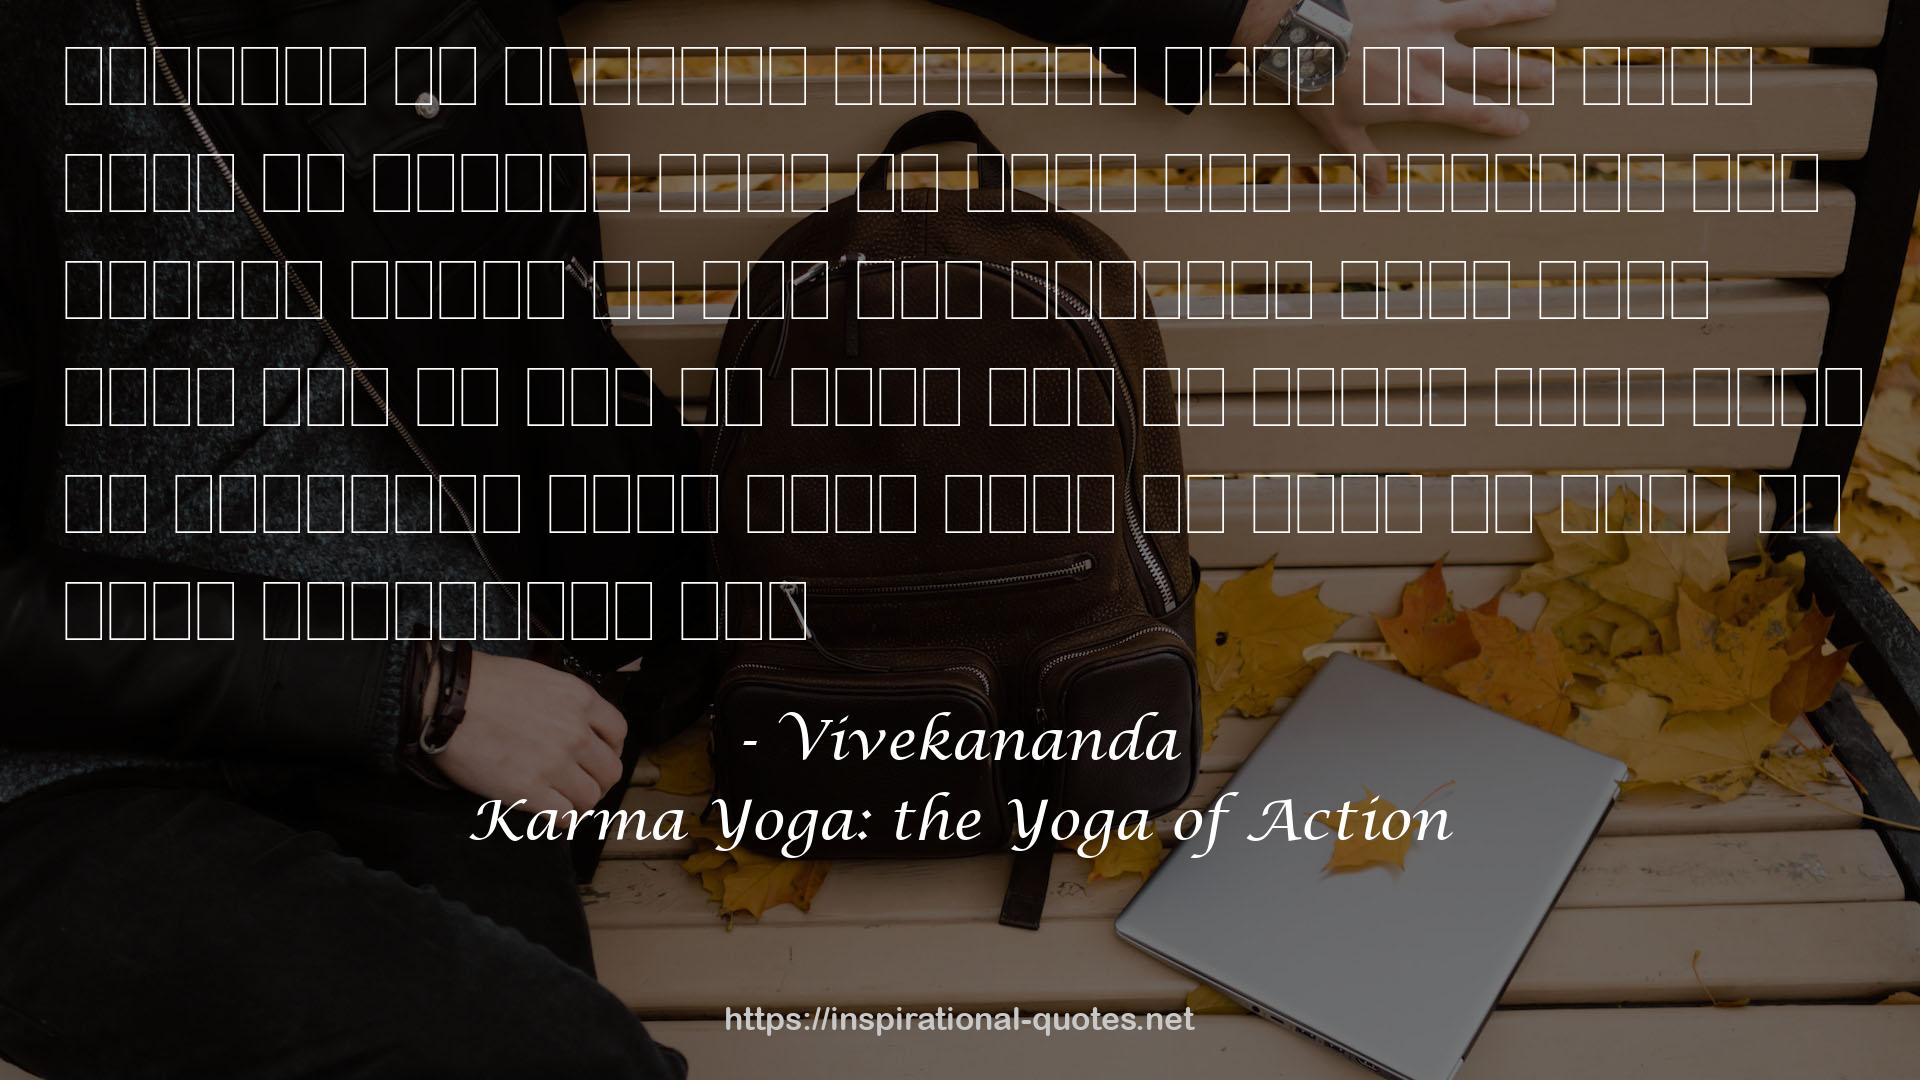 Karma Yoga: the Yoga of Action QUOTES